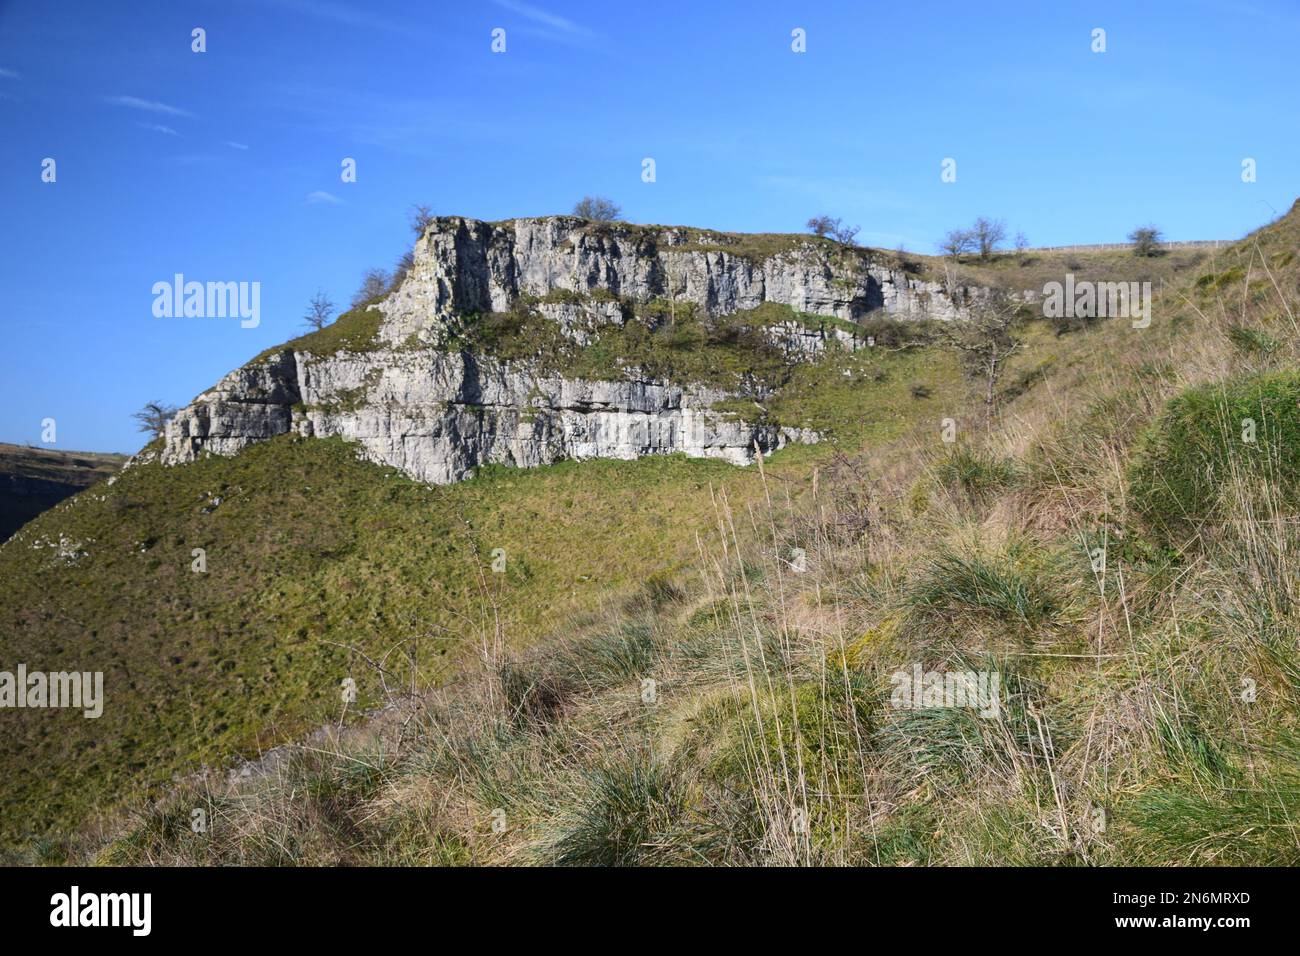 A winter's day walk in early February above and within Lathkill dale part of the Derbyshire peak district. Stock Photo